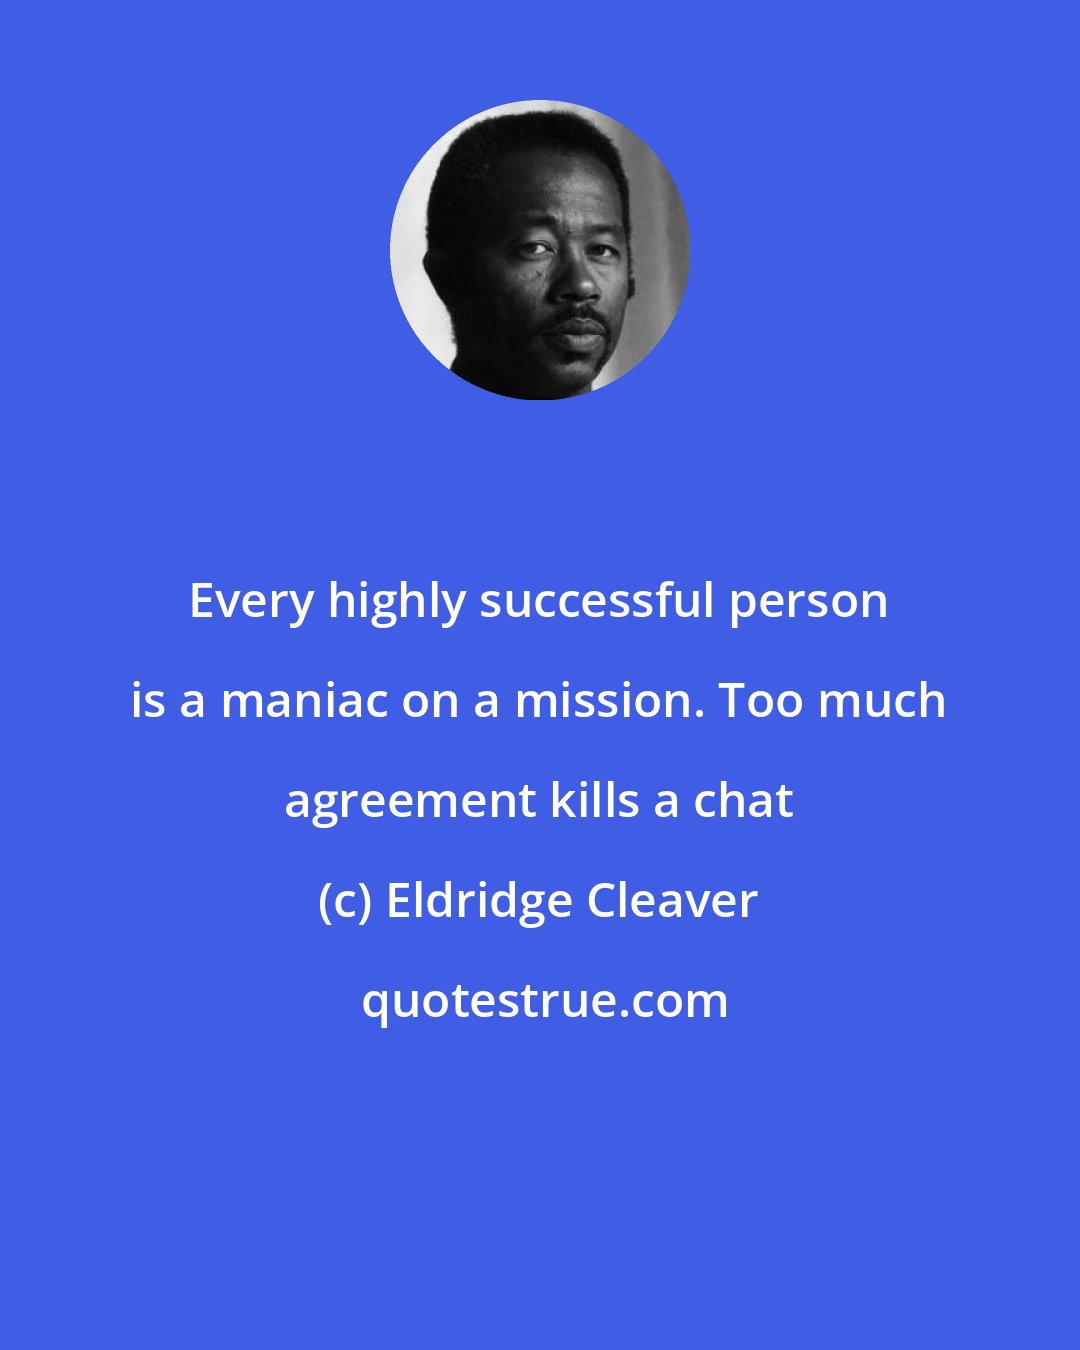 Eldridge Cleaver: Every highly successful person is a maniac on a mission. Too much agreement kills a chat